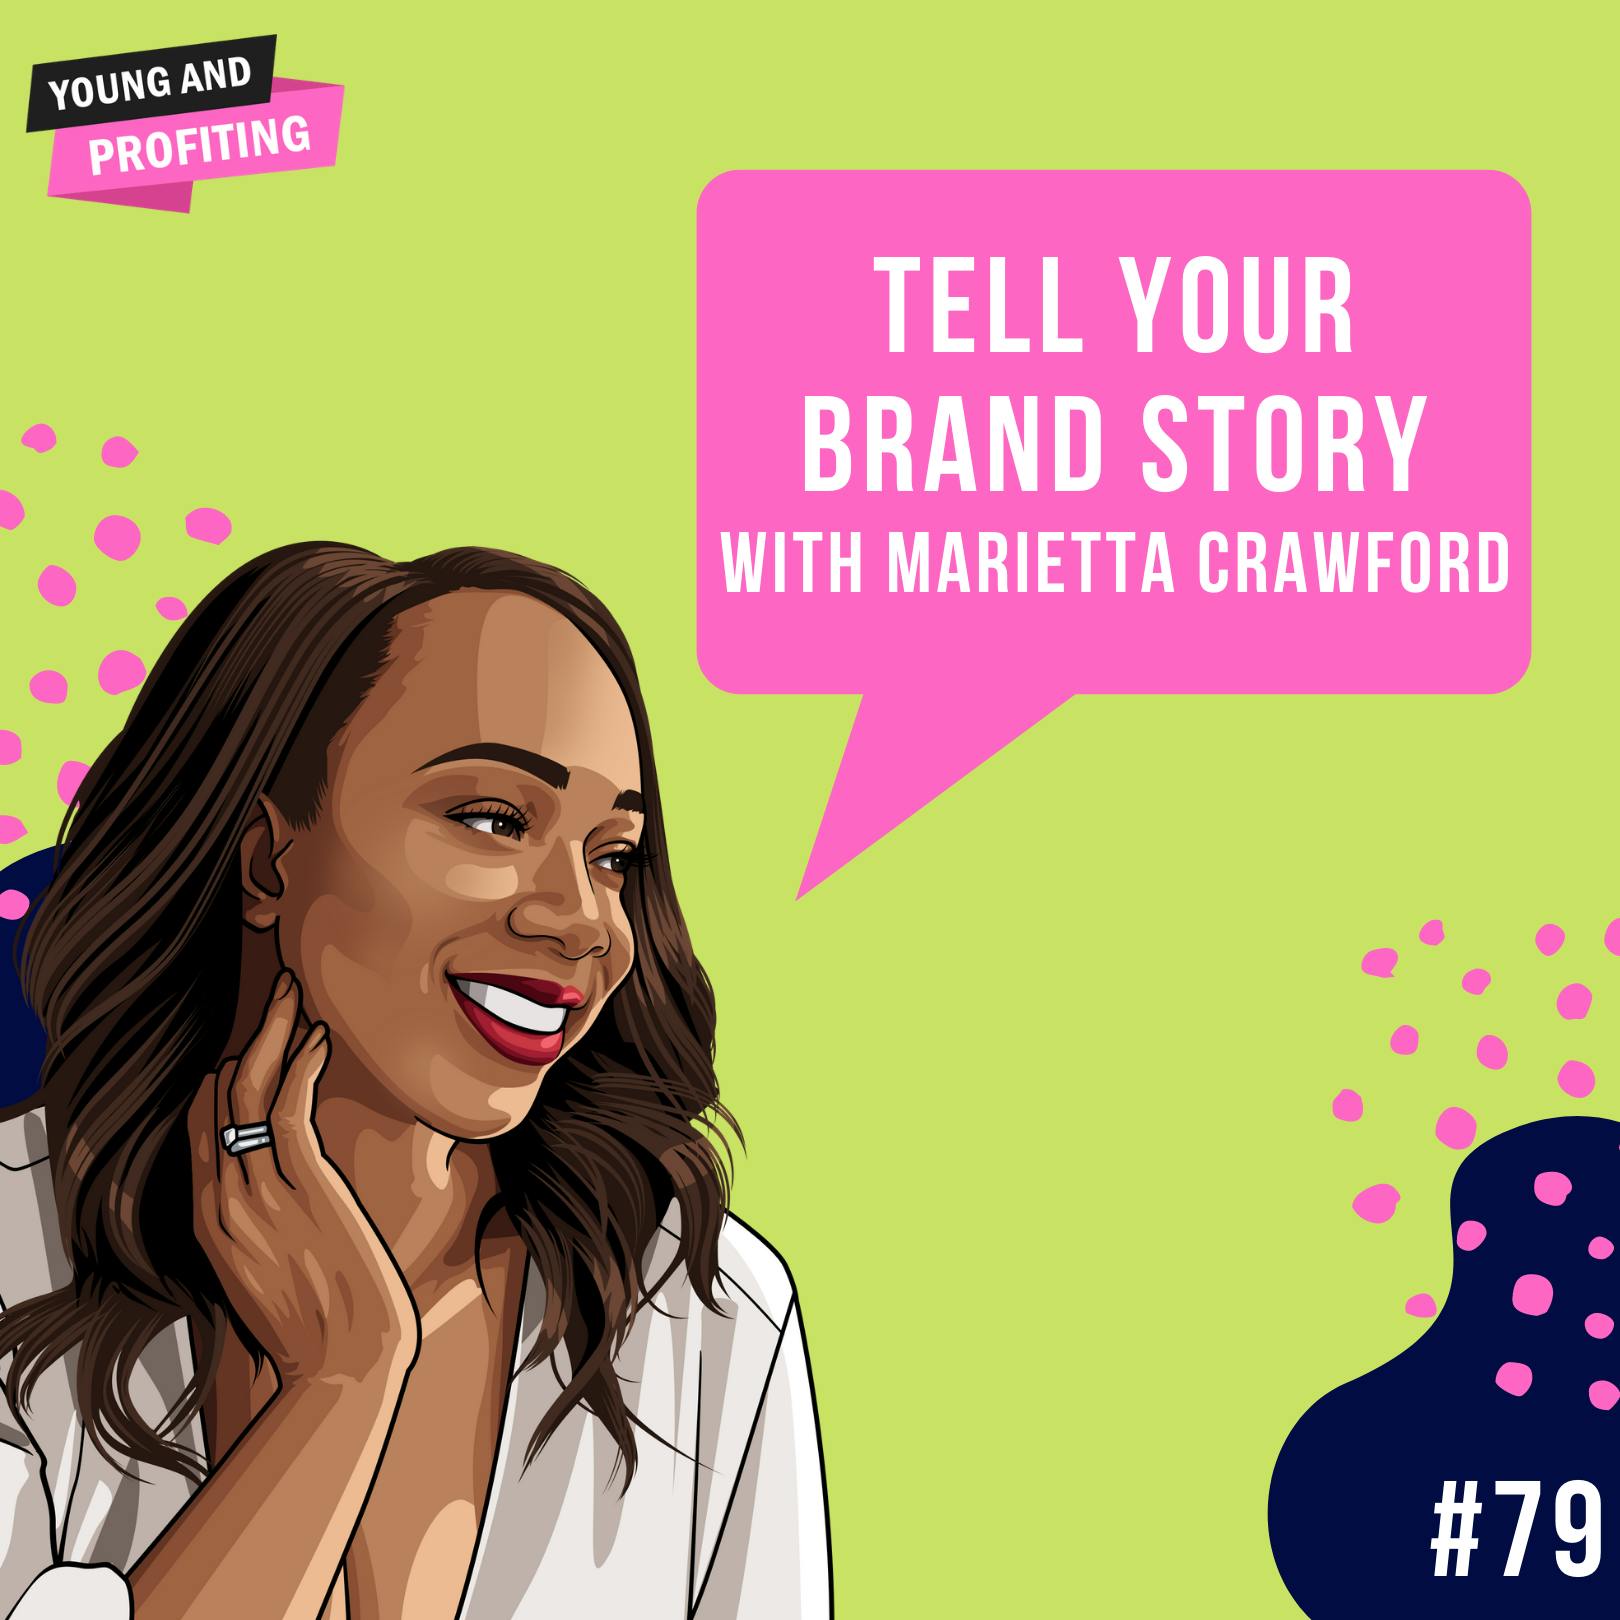 Marietta Gentles Crawford: Tell Your Brand Story and Transform Your Career | E79 by Hala Taha | YAP Media Network